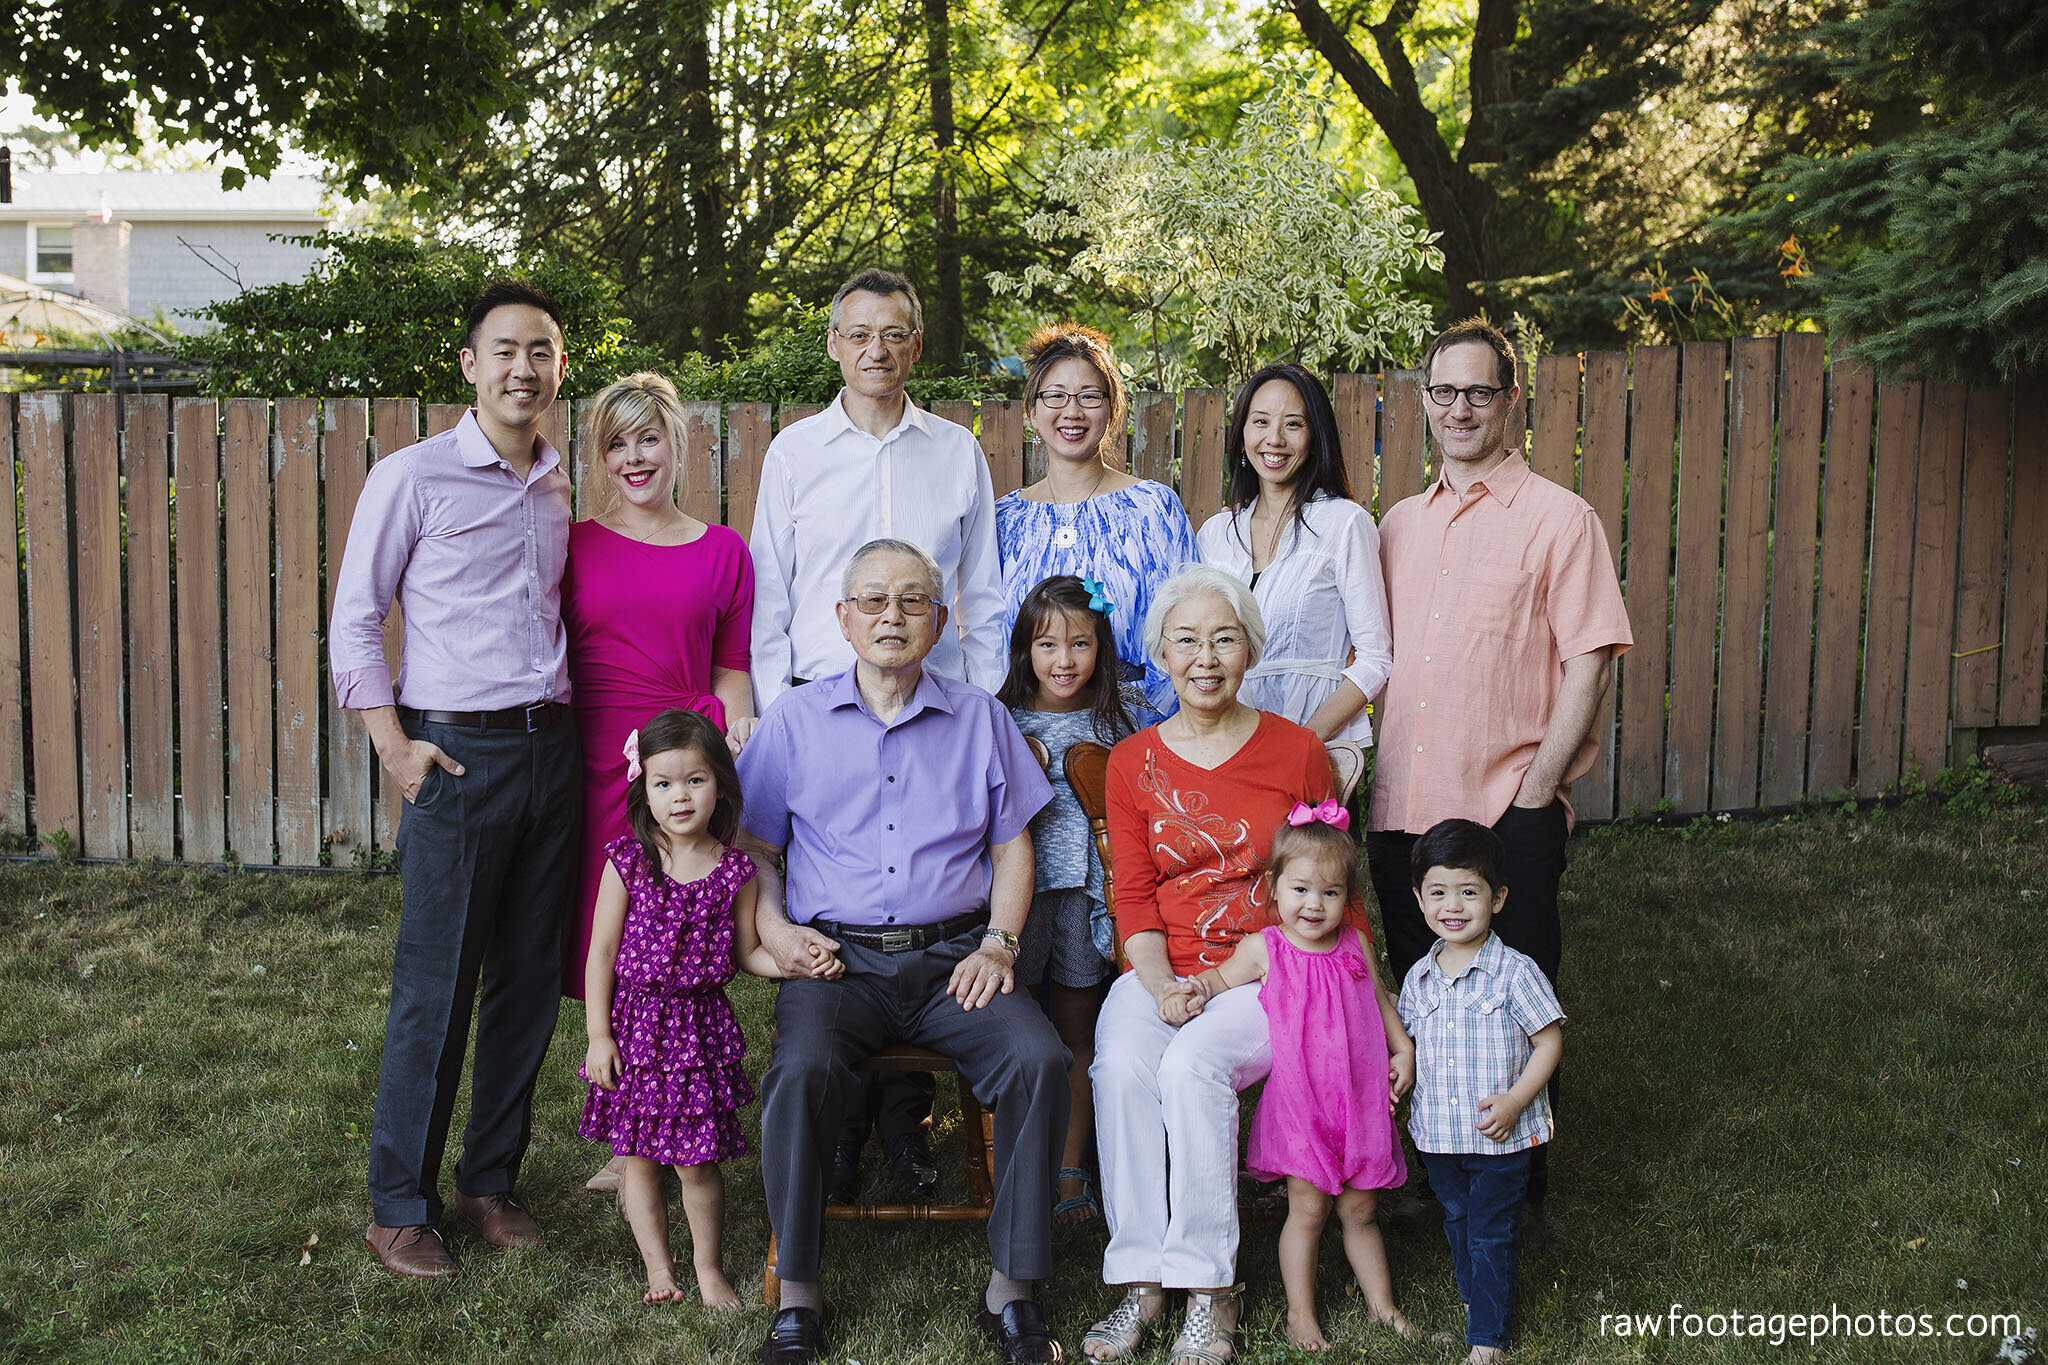 london_ontario_family_photographer-extended_family_session-grandparents-cousins-backyard_session-civic_gardens-raw_footage_photography-013.jpg